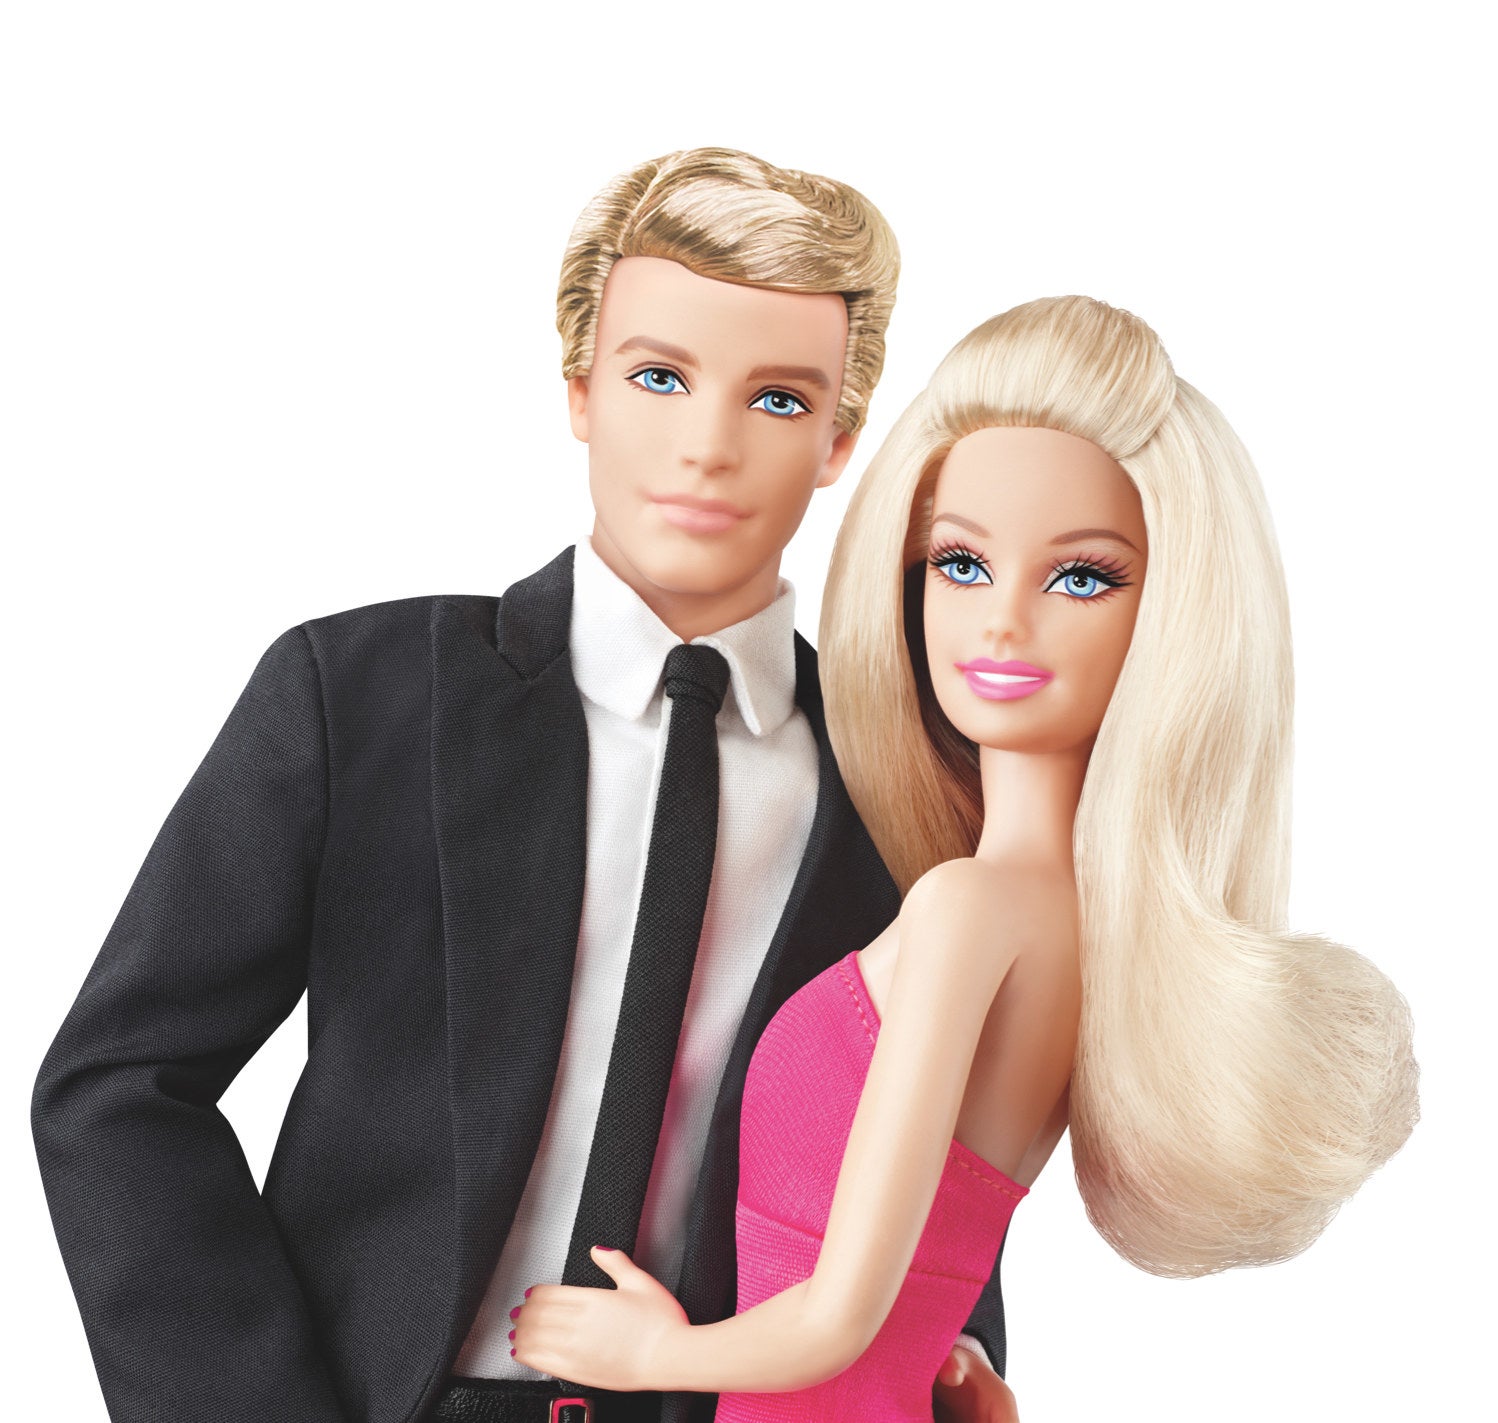 A Barbie and Ken from 2011